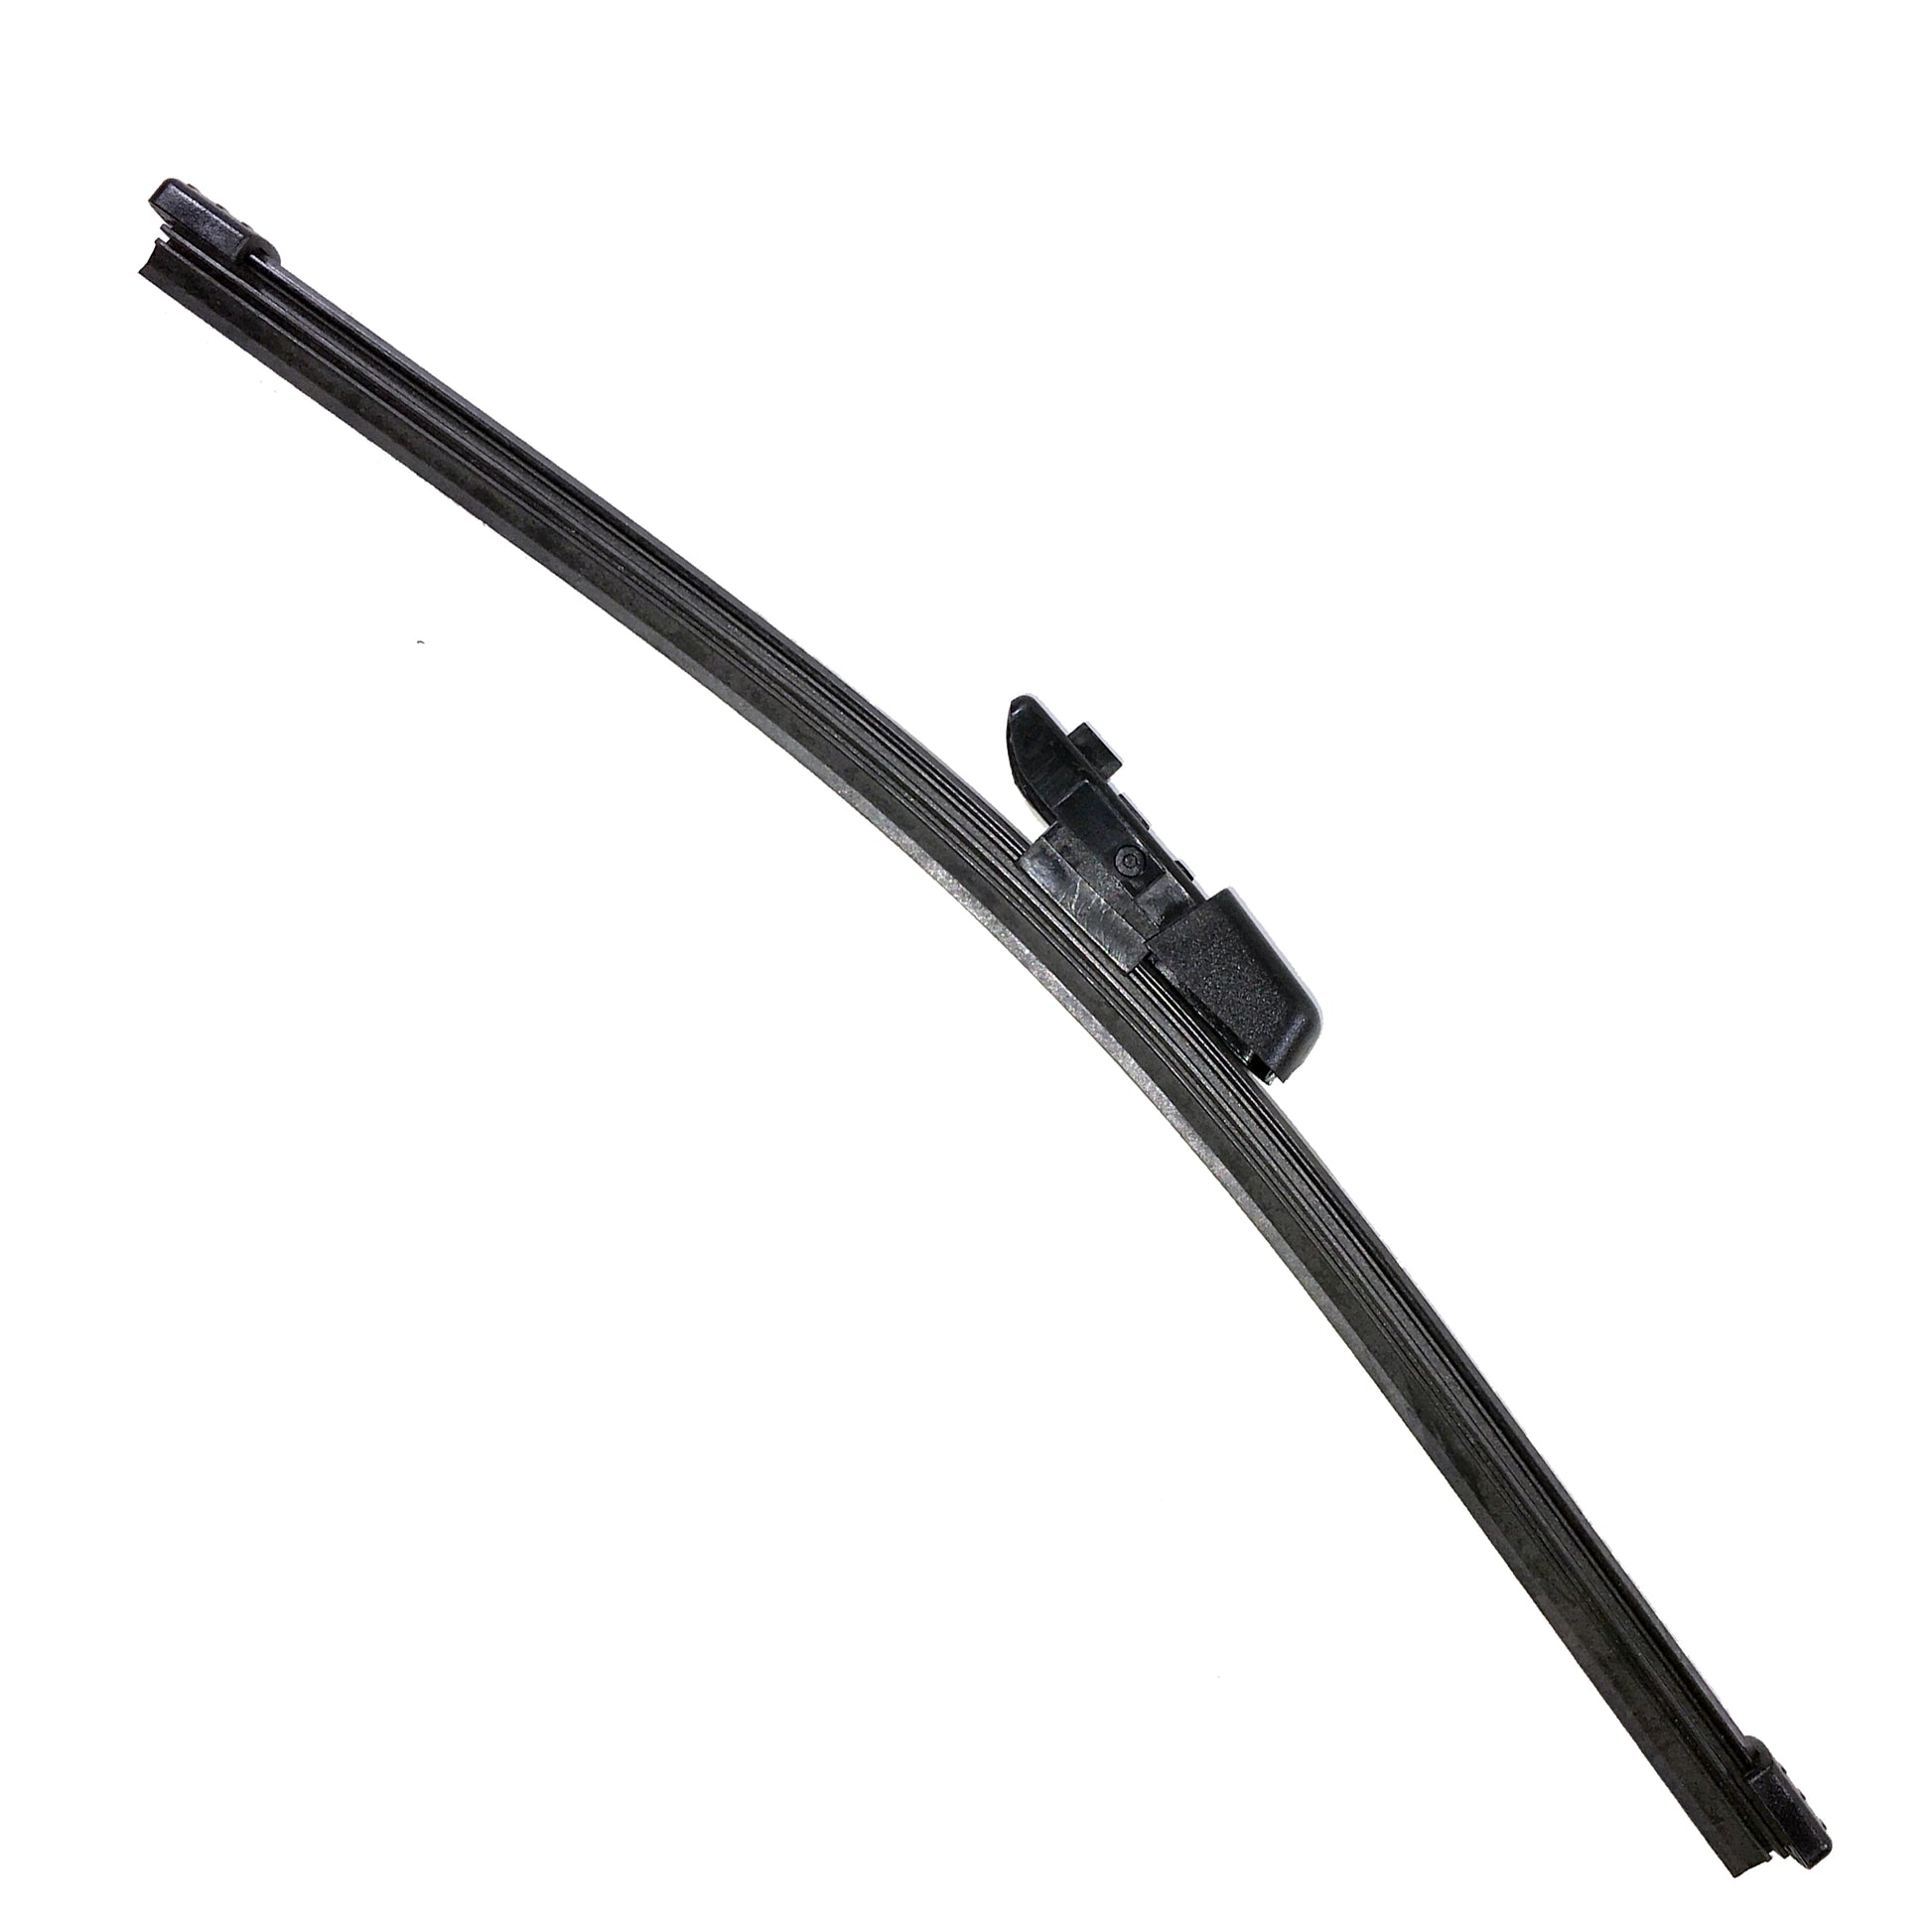 VW POLO MK 5 Hatchback Oct 2009 to Sep 2017Rear Wiper Blade 